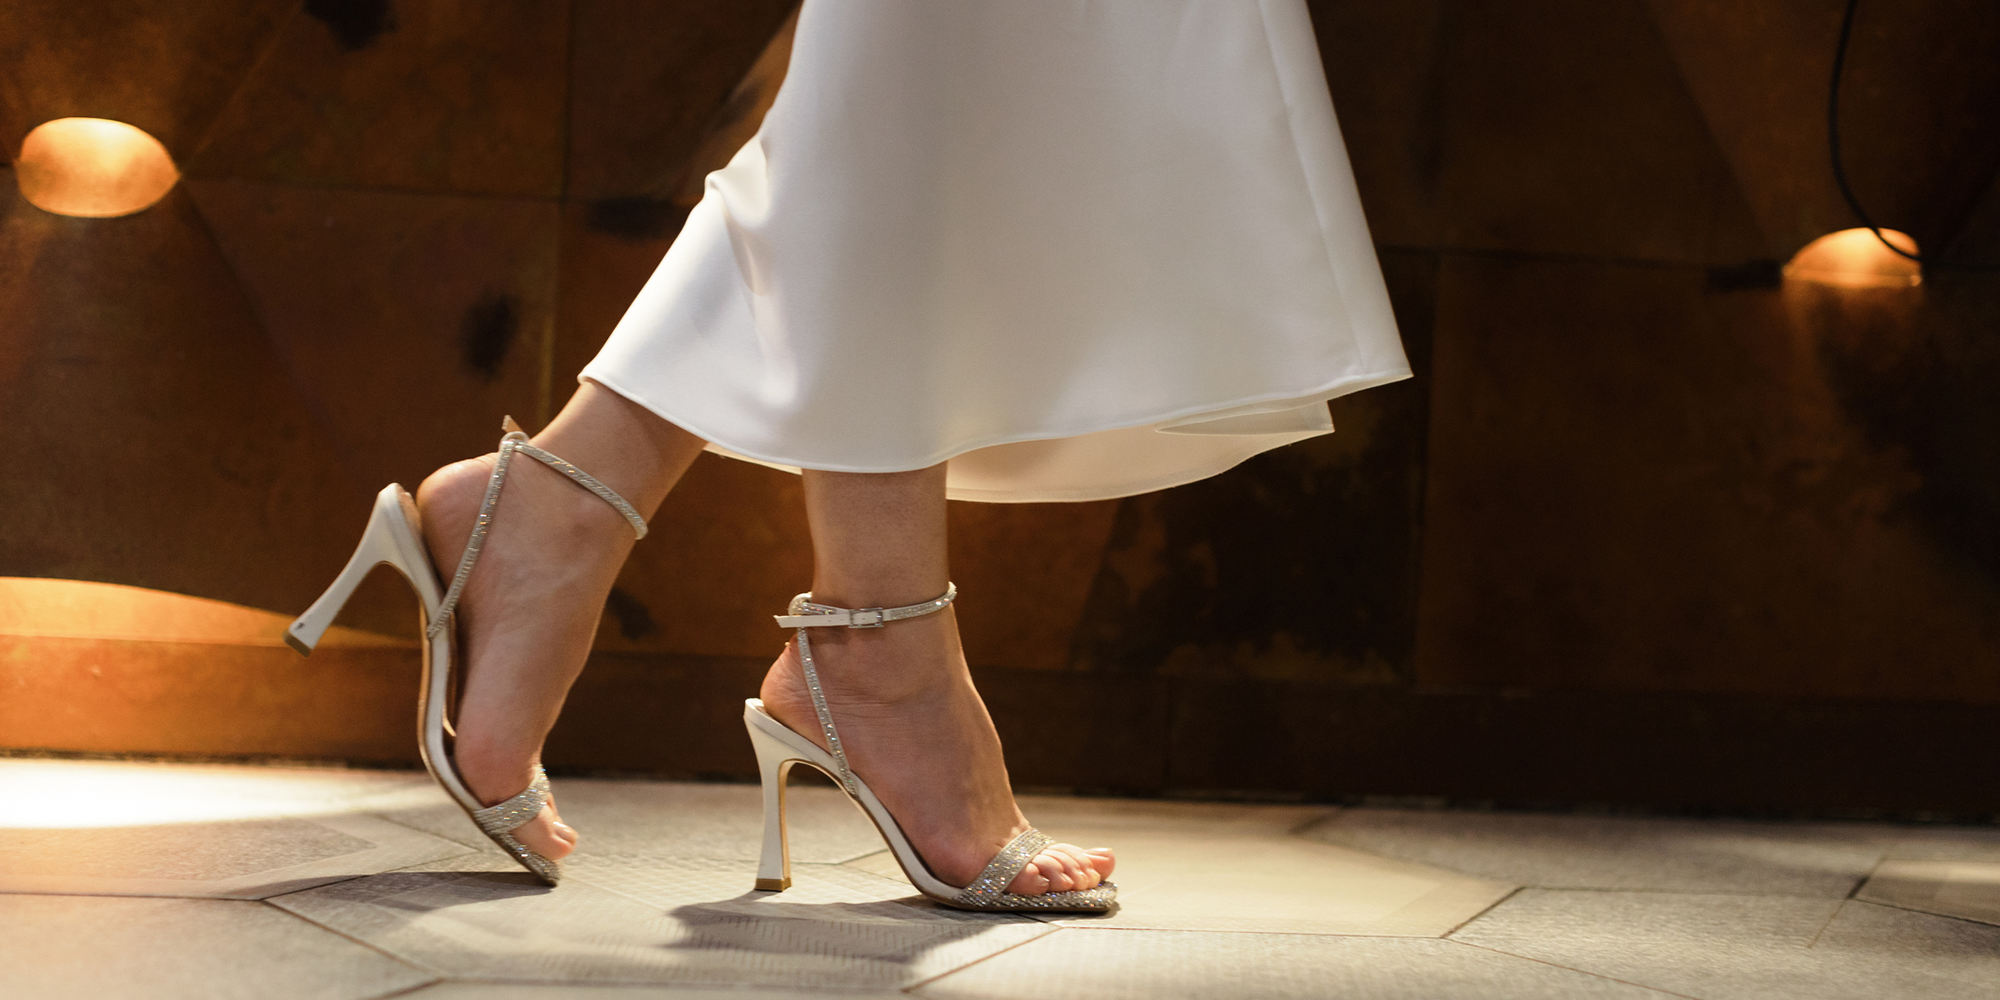 How to walk in high heels without pain, according to an expert picture